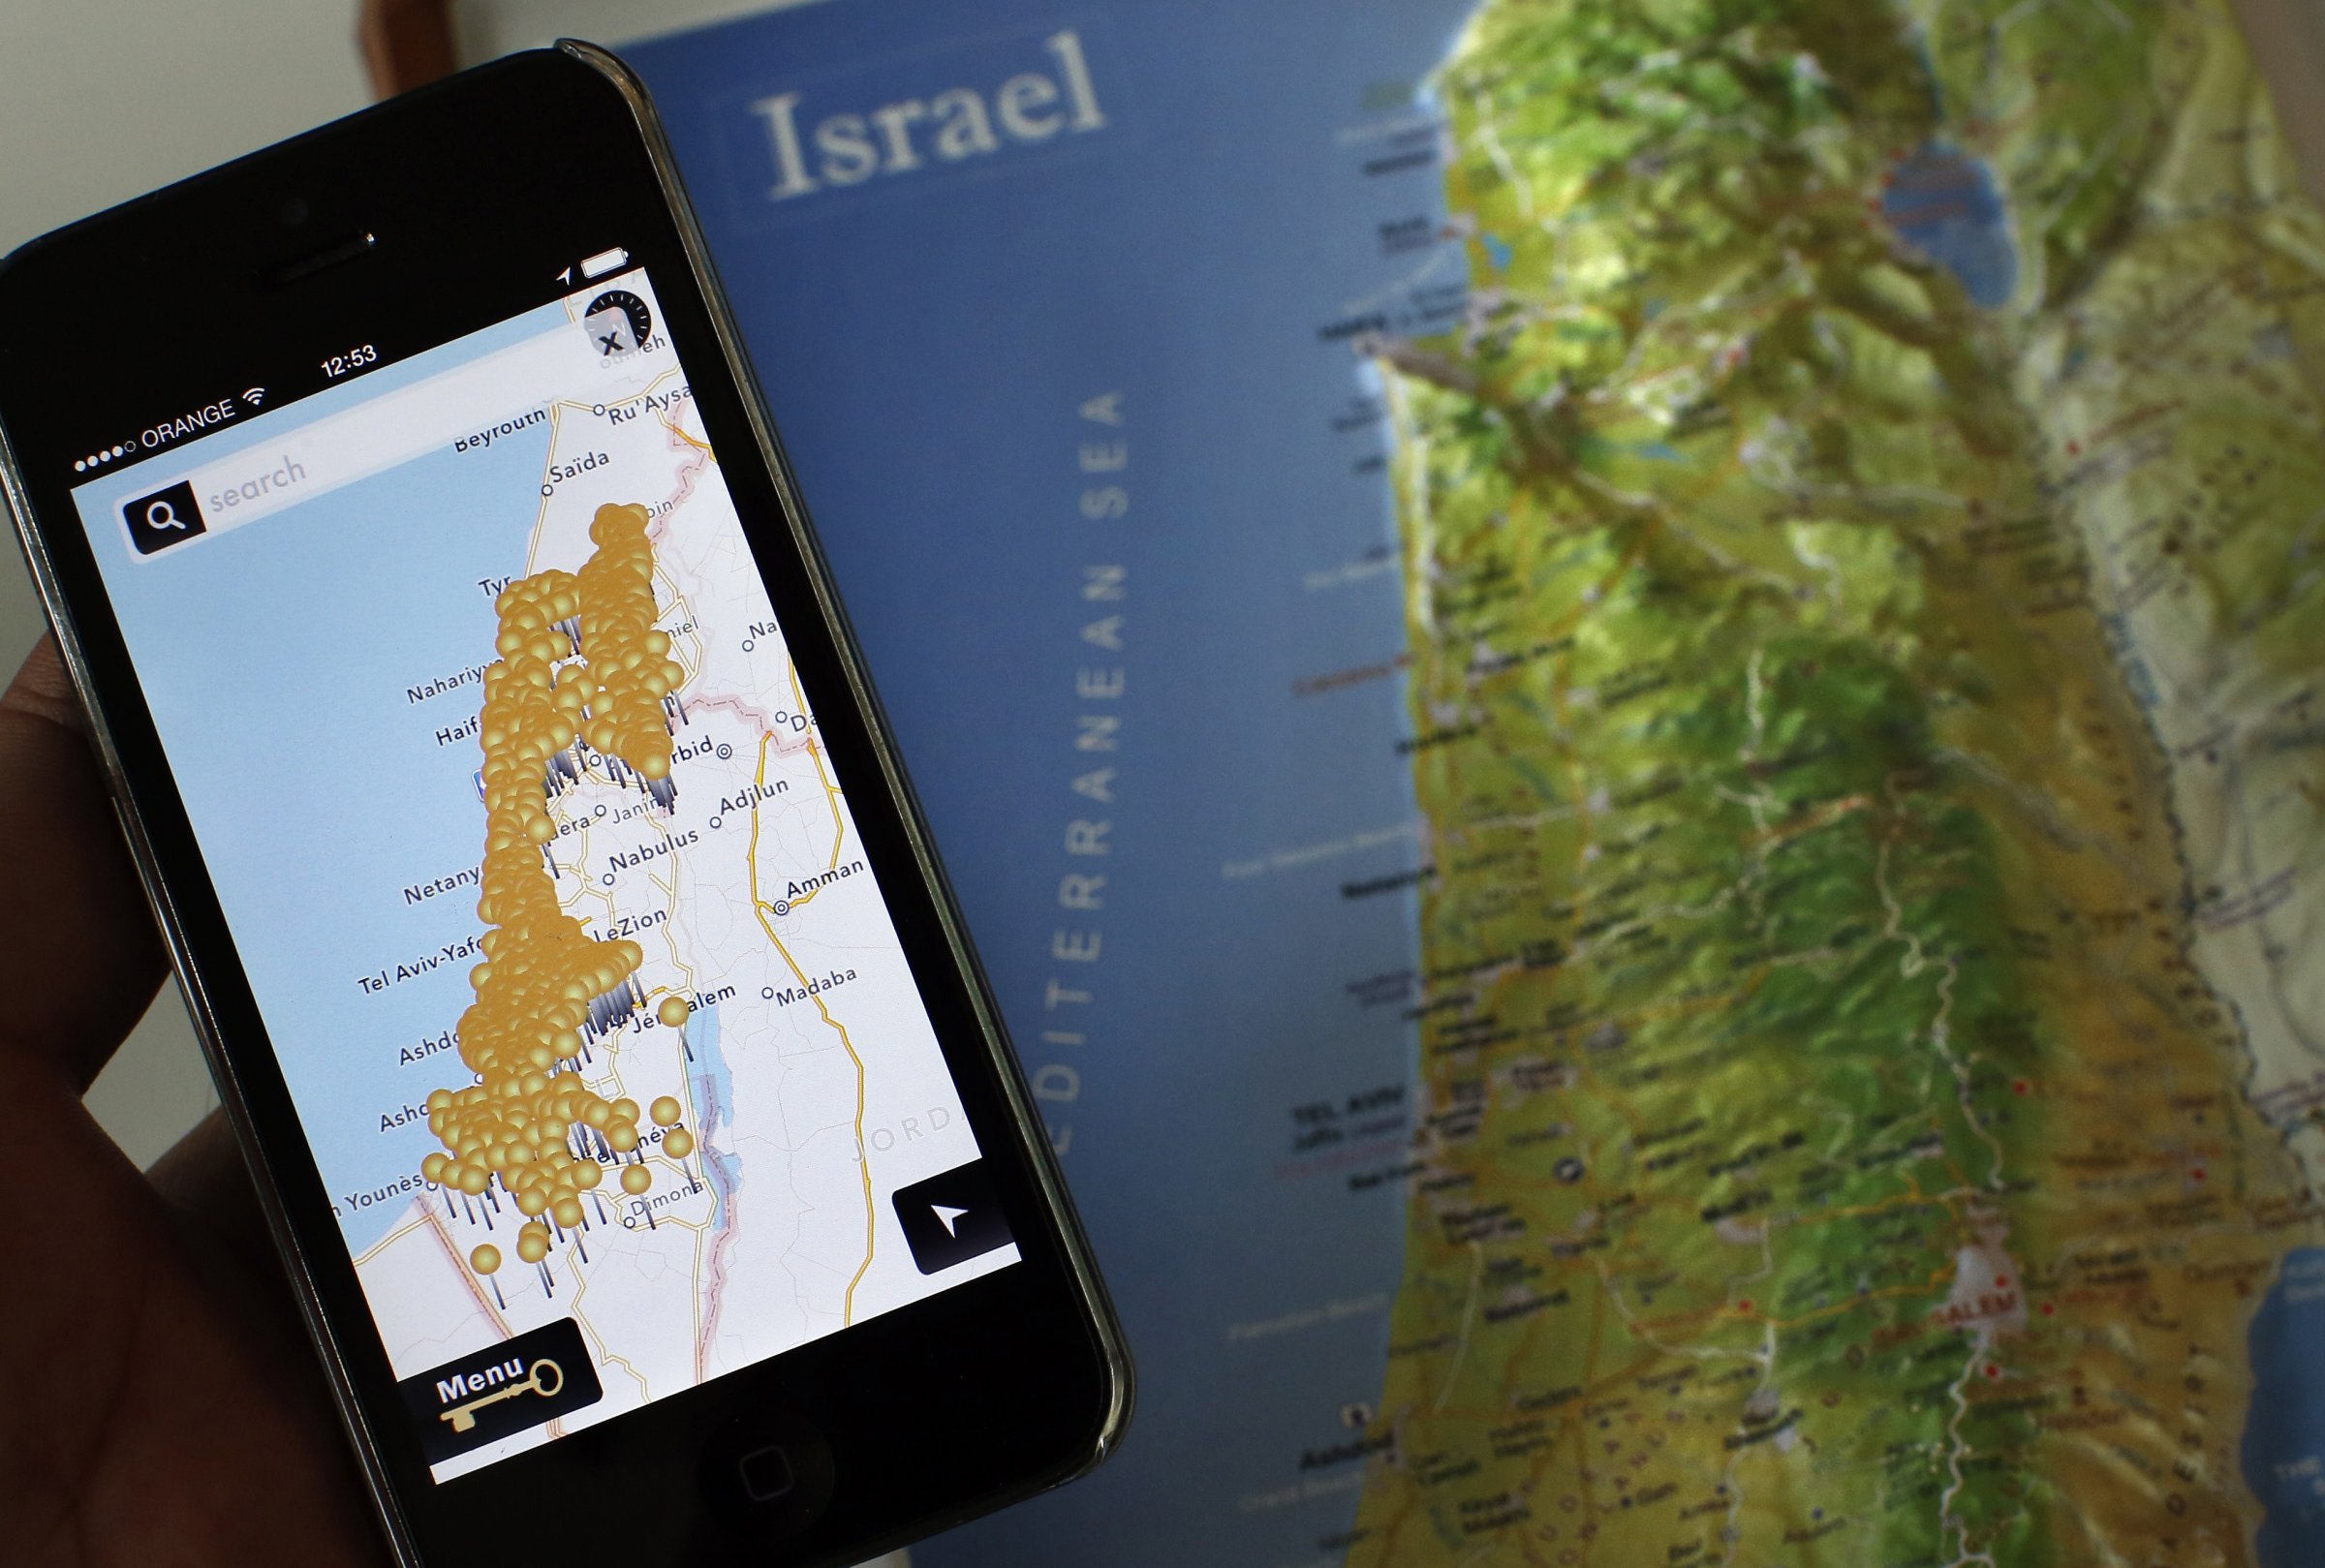 A smartphone placed on an Israeli map in Jerusalem, displaying the new iNakba application that allows users to find the remains of Palestinian villages that now lie inside modern-day Israel, May 5, 2014.